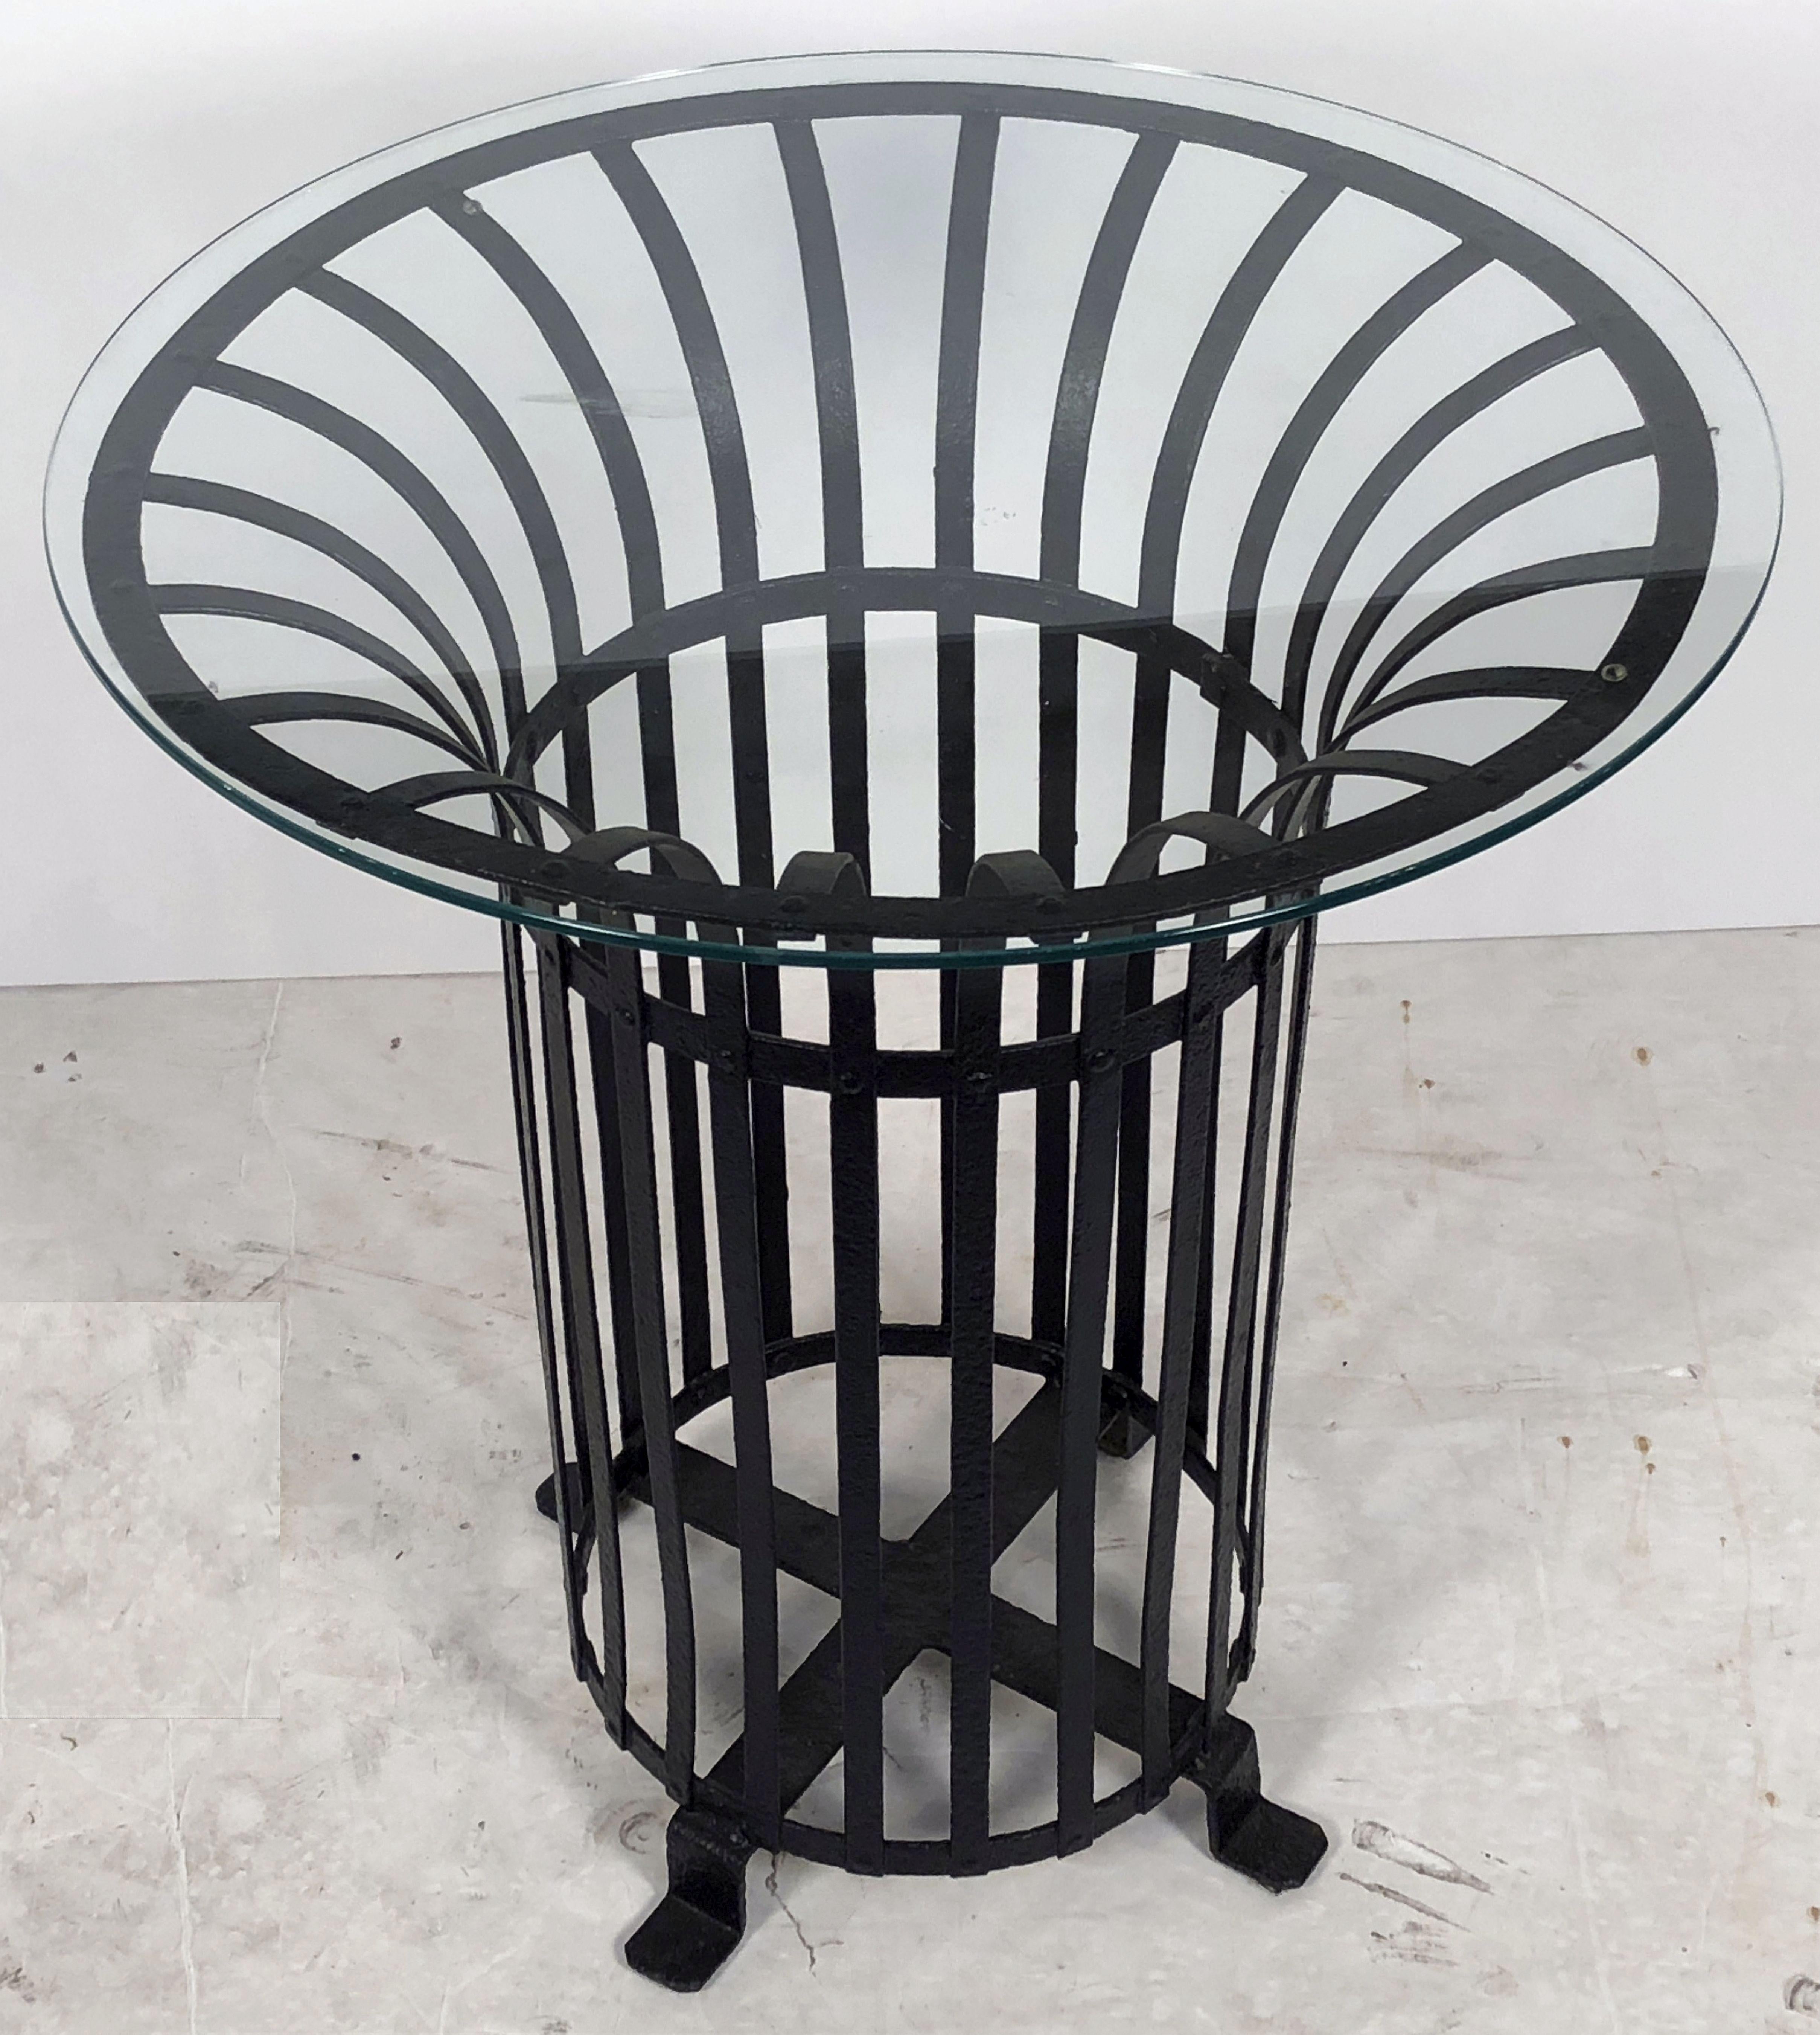 A pair of fine French round or circular side or occasional tables for indoors or outdoors - perfect for a garden, patio, or garden room.
Each table featuring a round glass top set upon a sturdy and stylish wrought iron base.

Dimensions of each